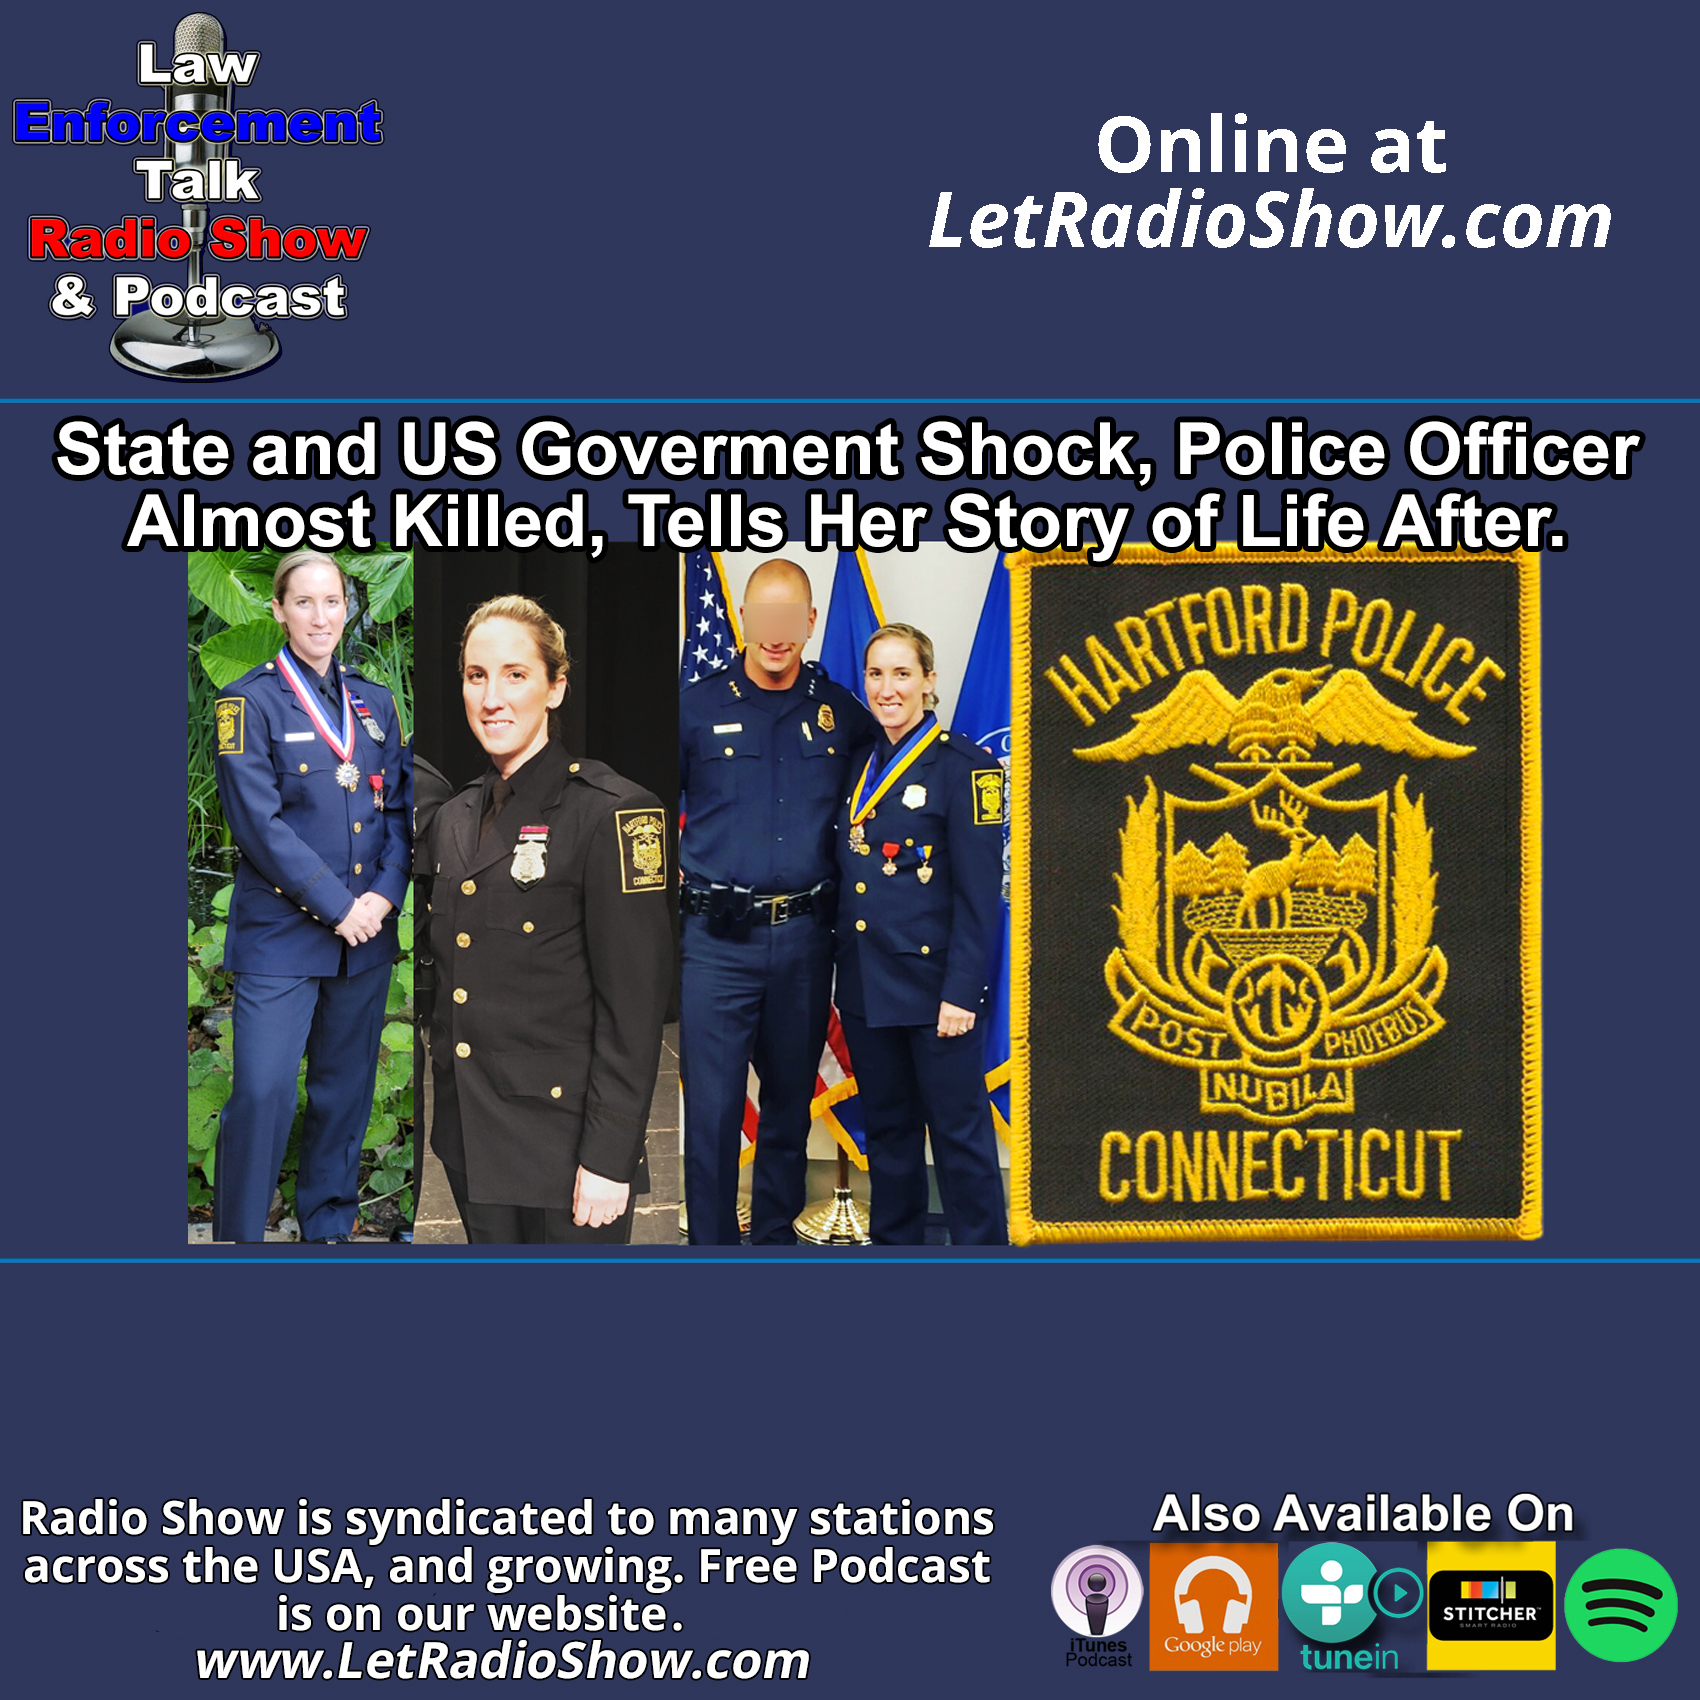 State and US Goverment Shock, Police Officer Almost Killed.